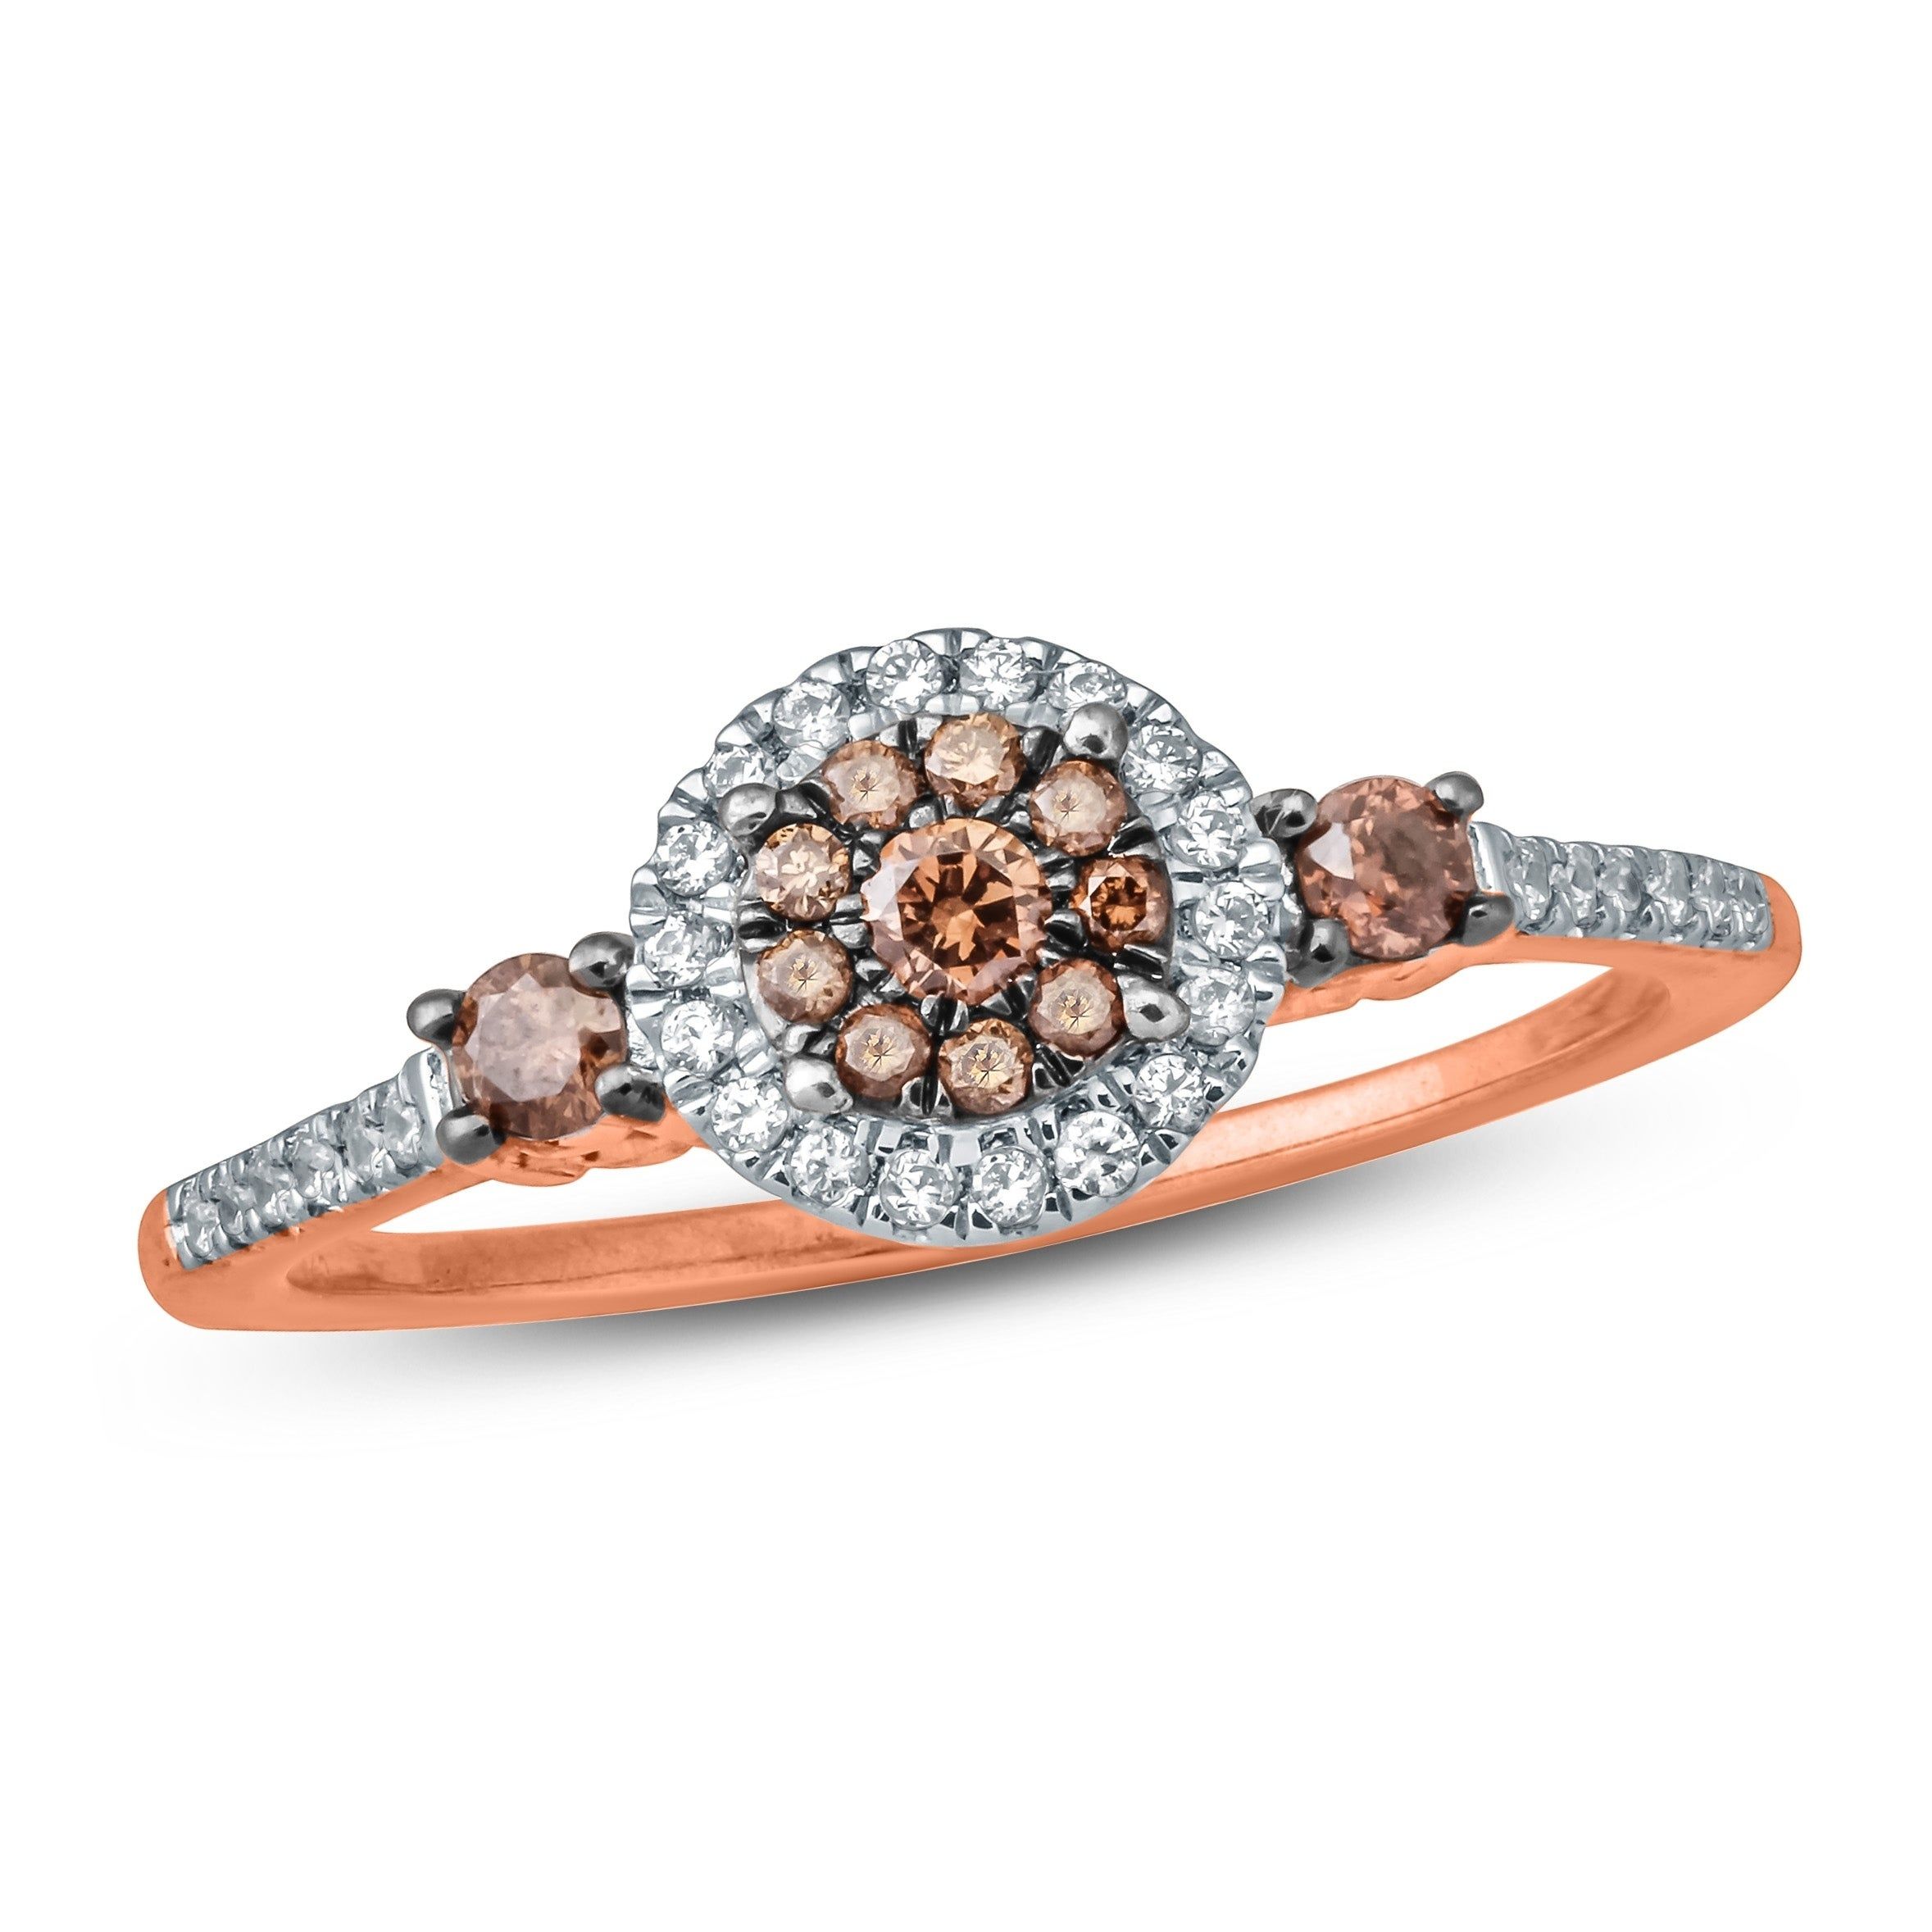 Cali Trove 1/3 Carat White & Champagne Diamond Composite Engagement Ring  10k Rose Gold (View 15 of 25)